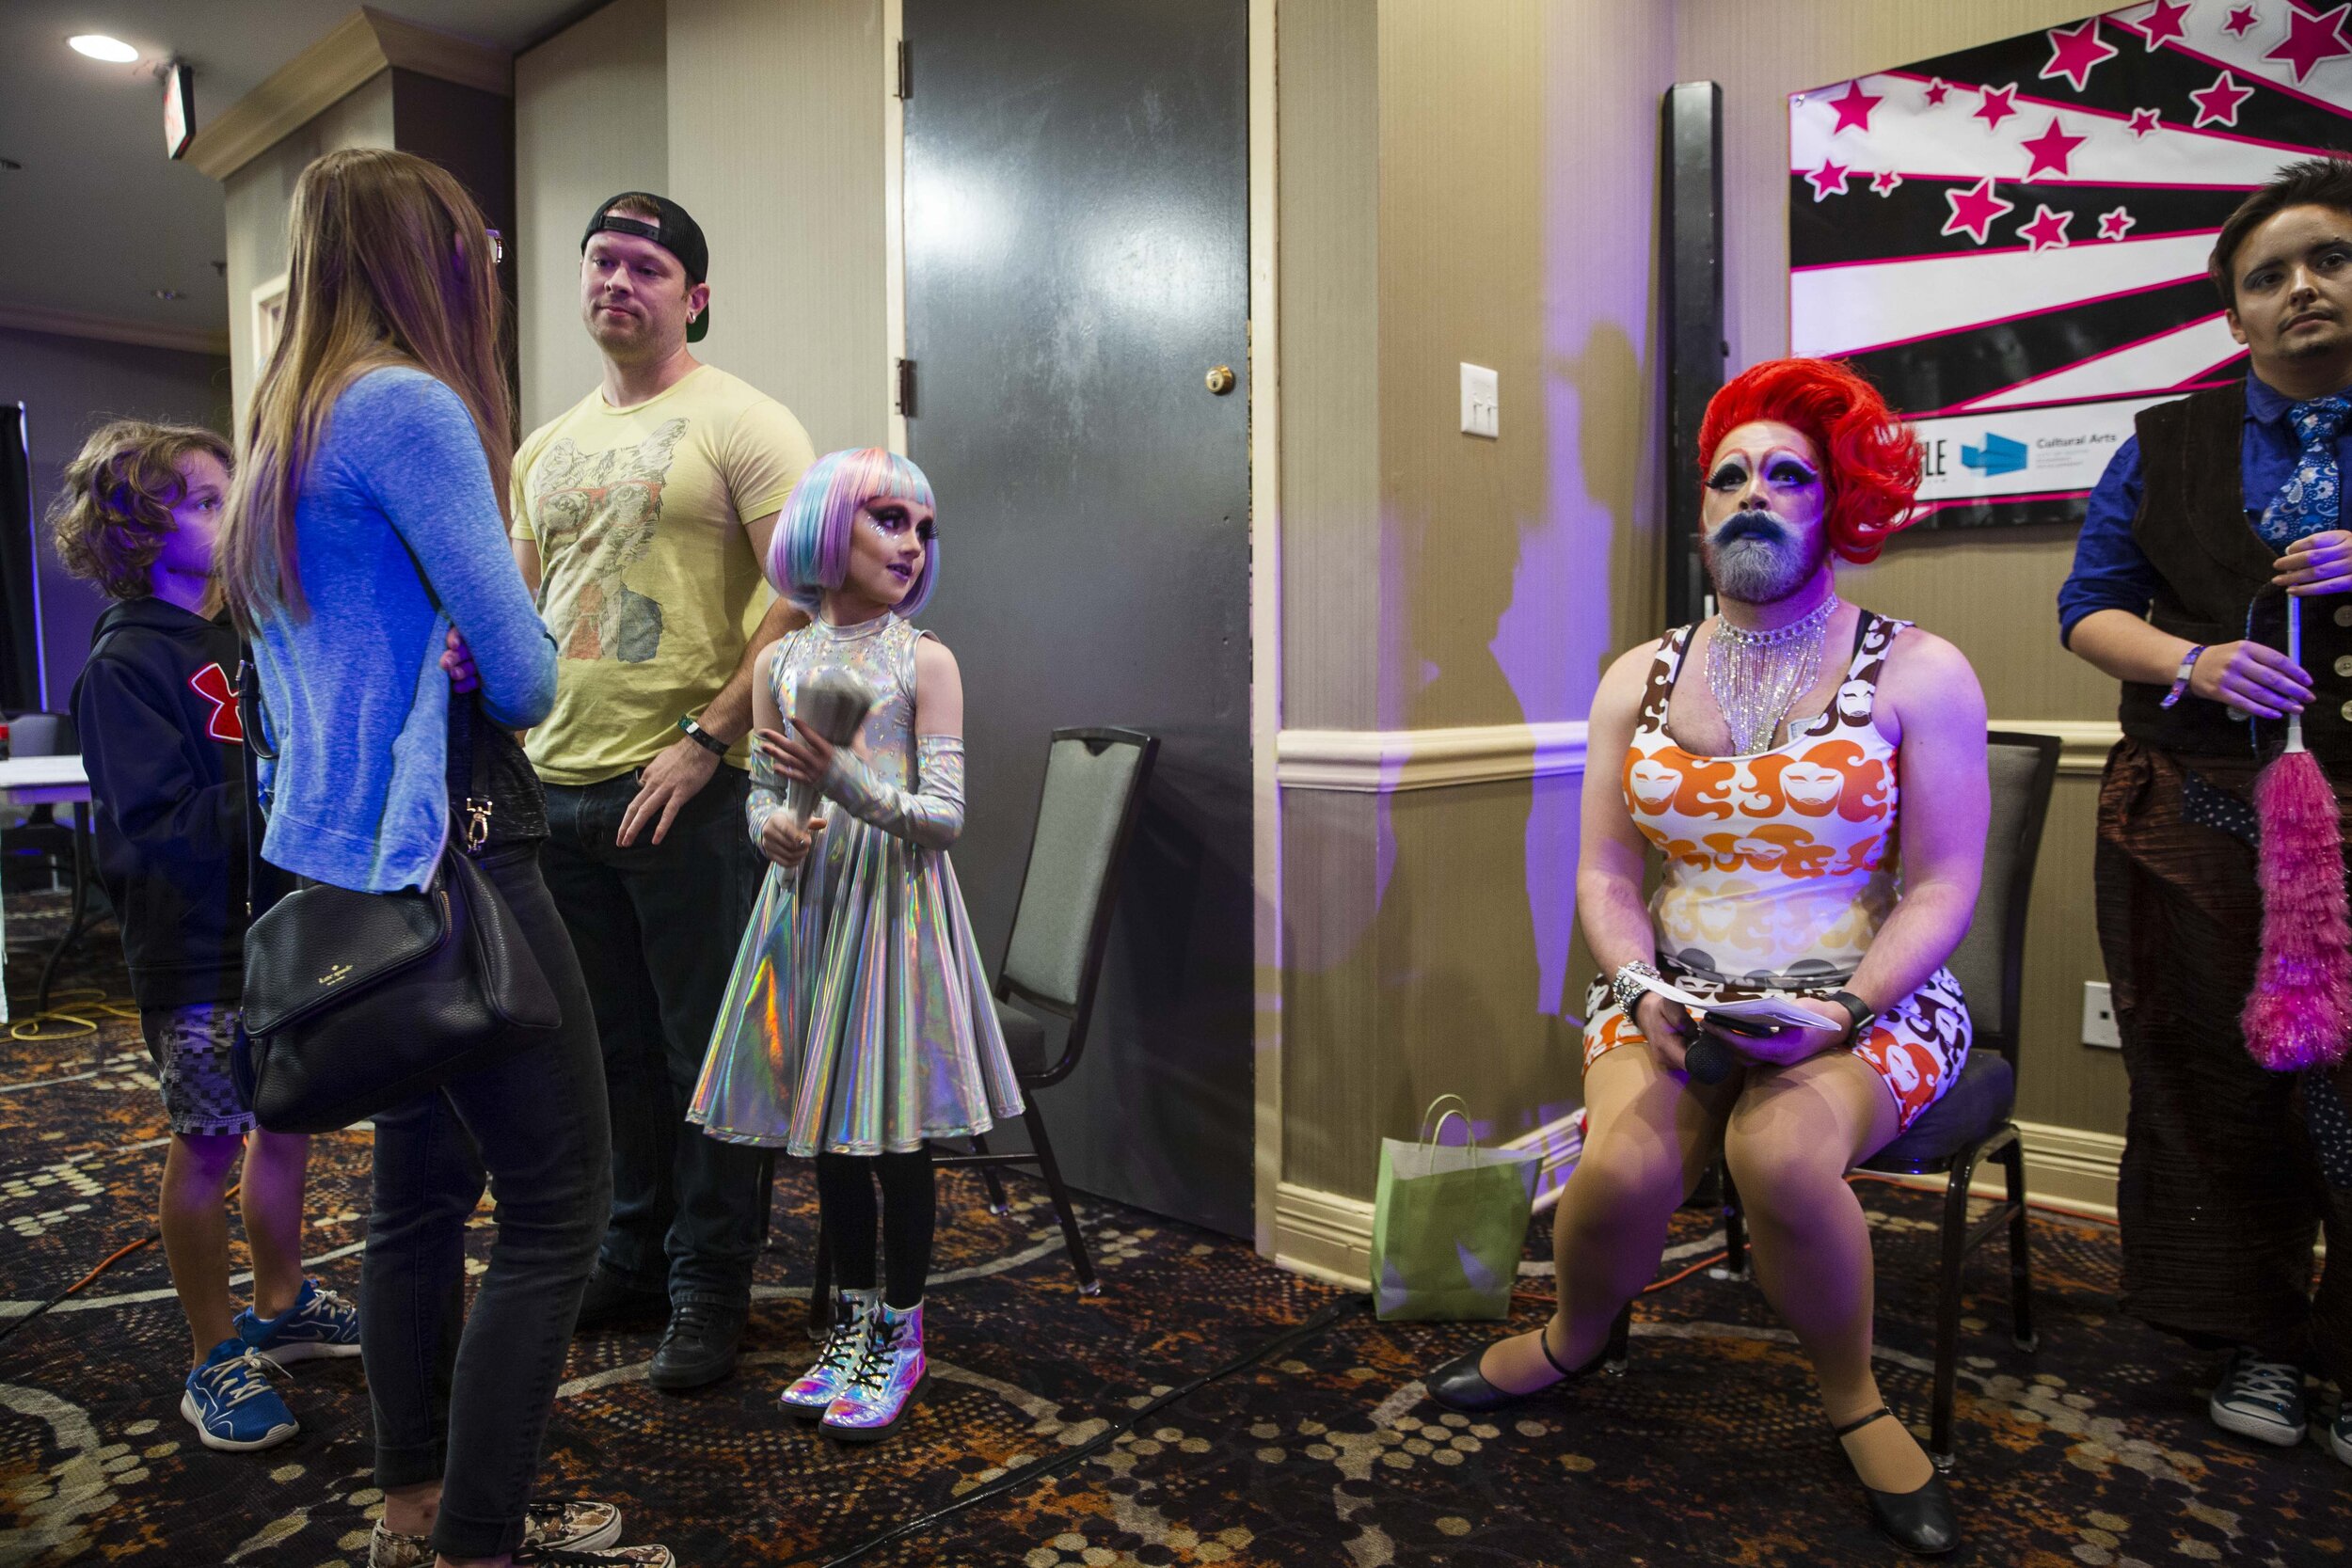  Keegan, a gender creative child, drag name KweenKeekee, then 8, middle, accompanied by his family, glances at another performer during the Austin International Drag Fest 2018 in Austin, Texas, U.S., Nov. 18, 2018. 